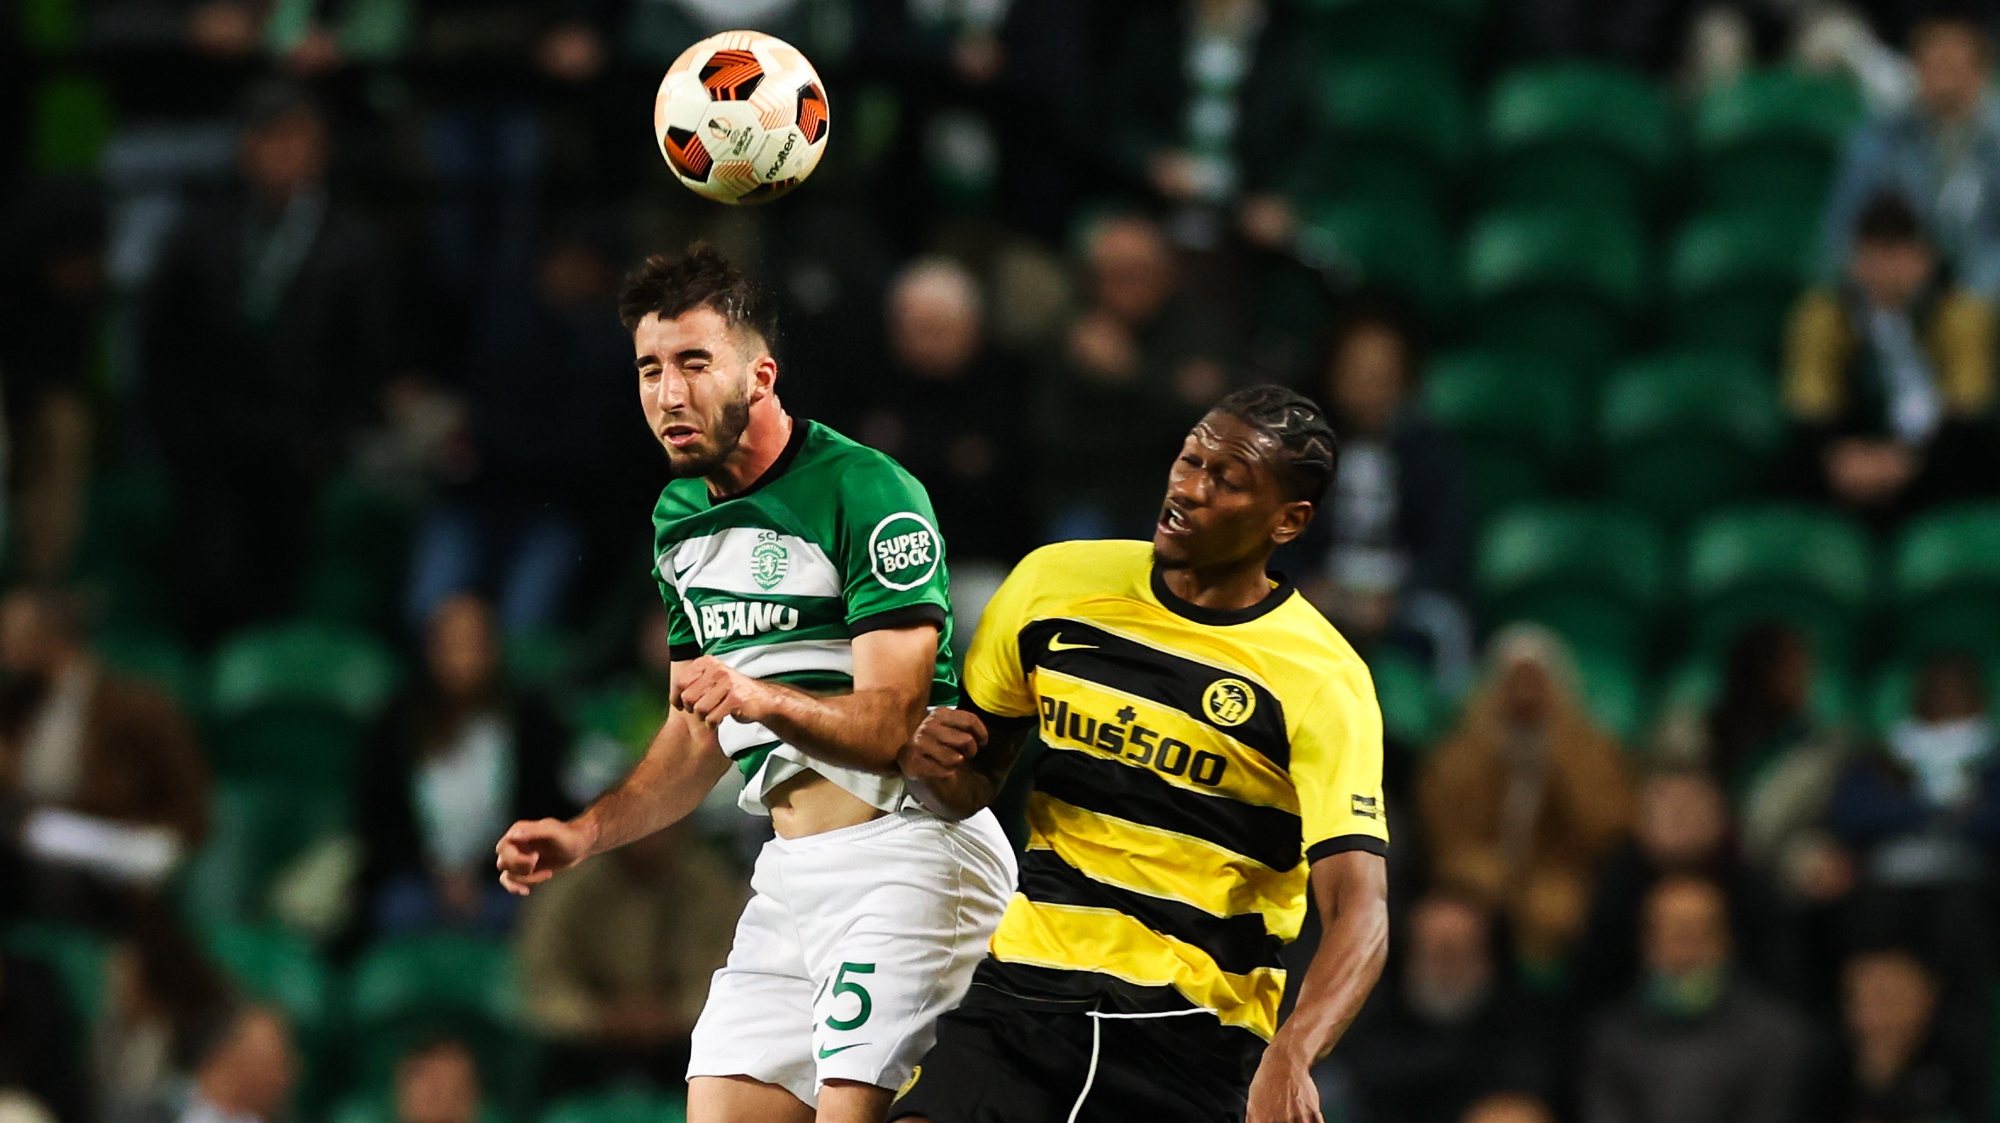 Sporting CP player Goncalo Inacio (L) in action against Young Boys player Joel Monteiro during their UEFA Europa League knockout round playoff second leg match, held at Alvalade Stadium, in Lisbon, Portugal, 22 February 2024. JOSE SENA GOULAO/LUSA